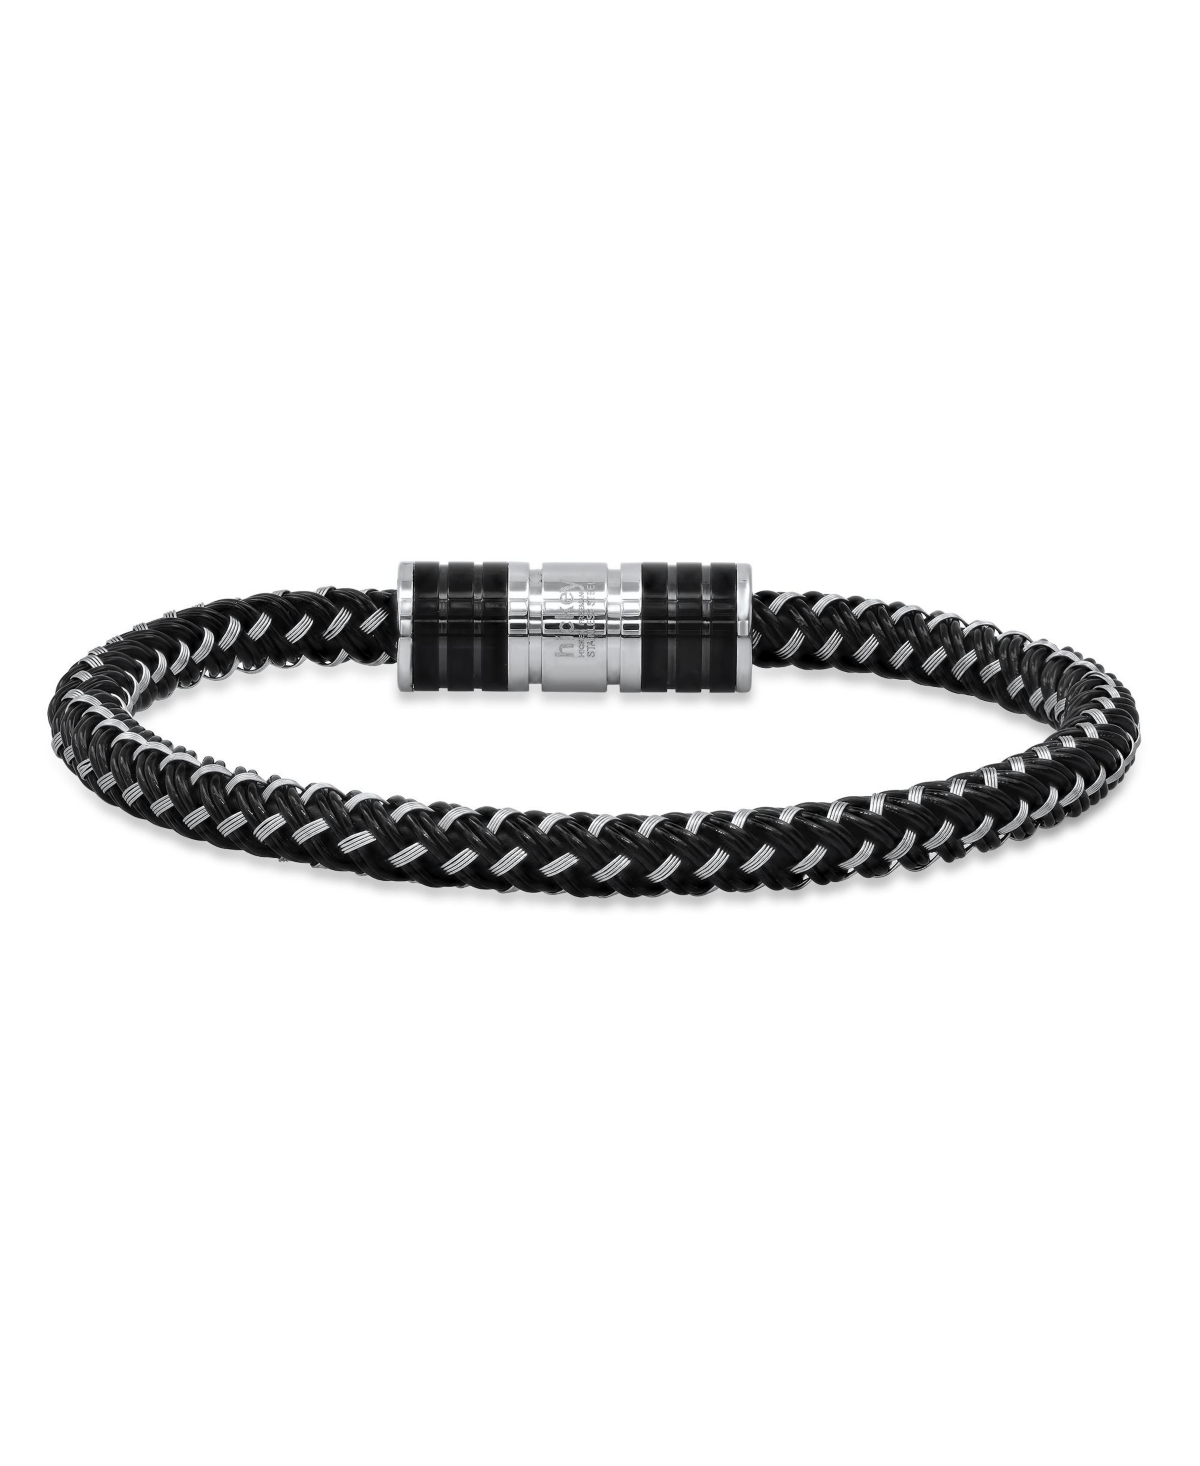 Hmy Jewelry Carbon Fiber Two Tone Stainless Steel And Leather Cord Woven Braided Bracelet In Multi